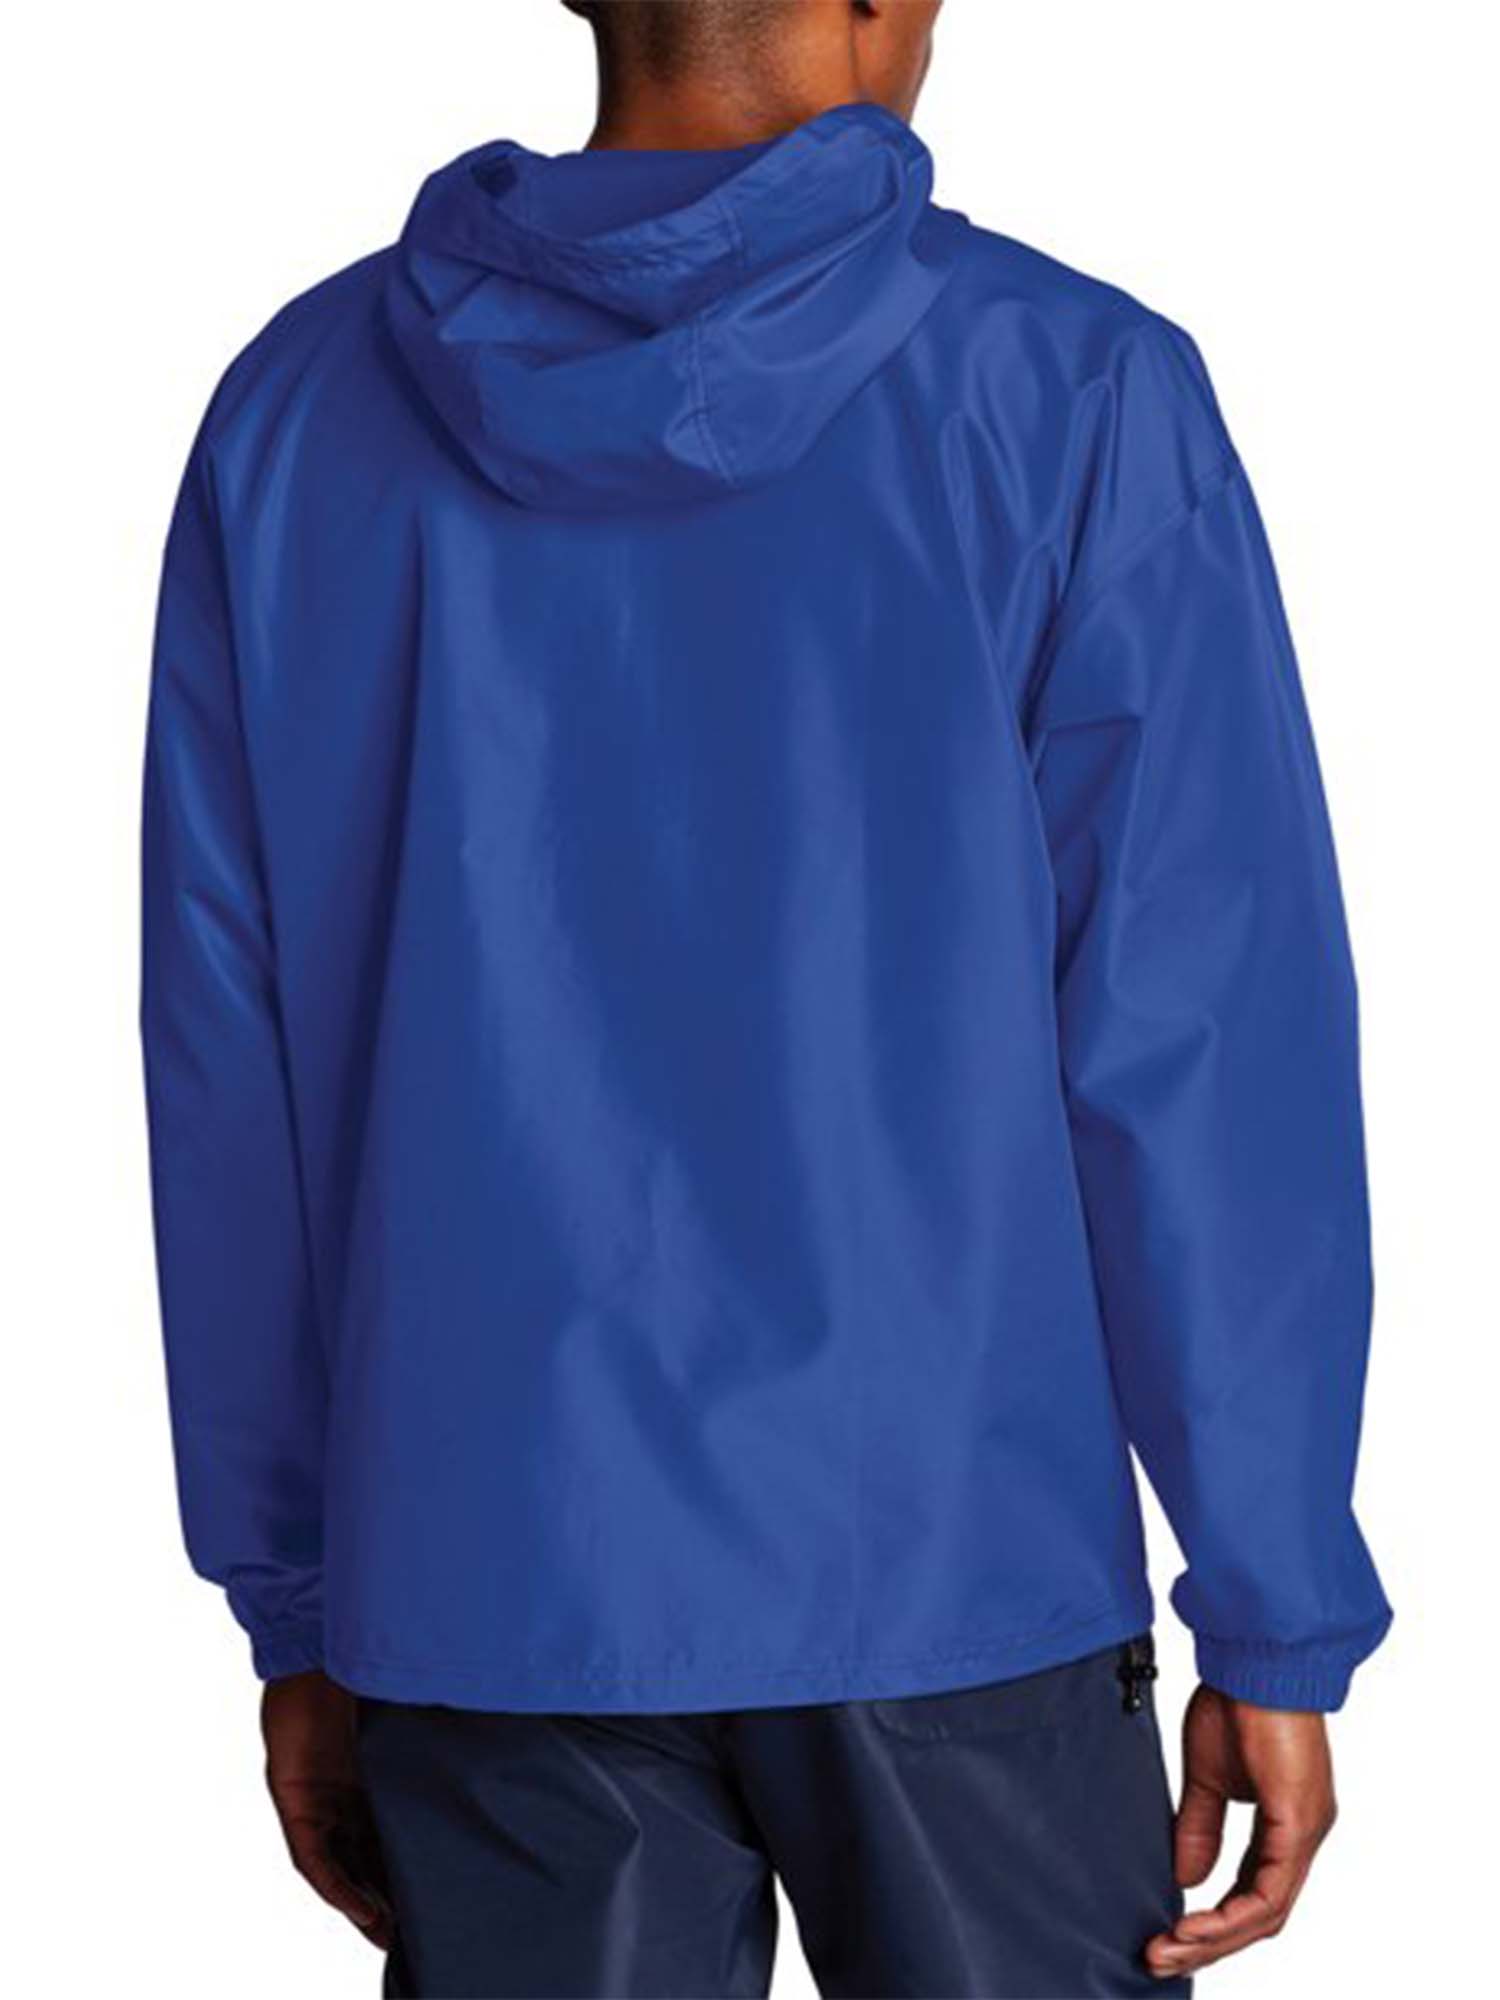 Champion Men's and Big Men's Stadium Packable Windbreaker Jacket, up to Size 2XL - image 3 of 7